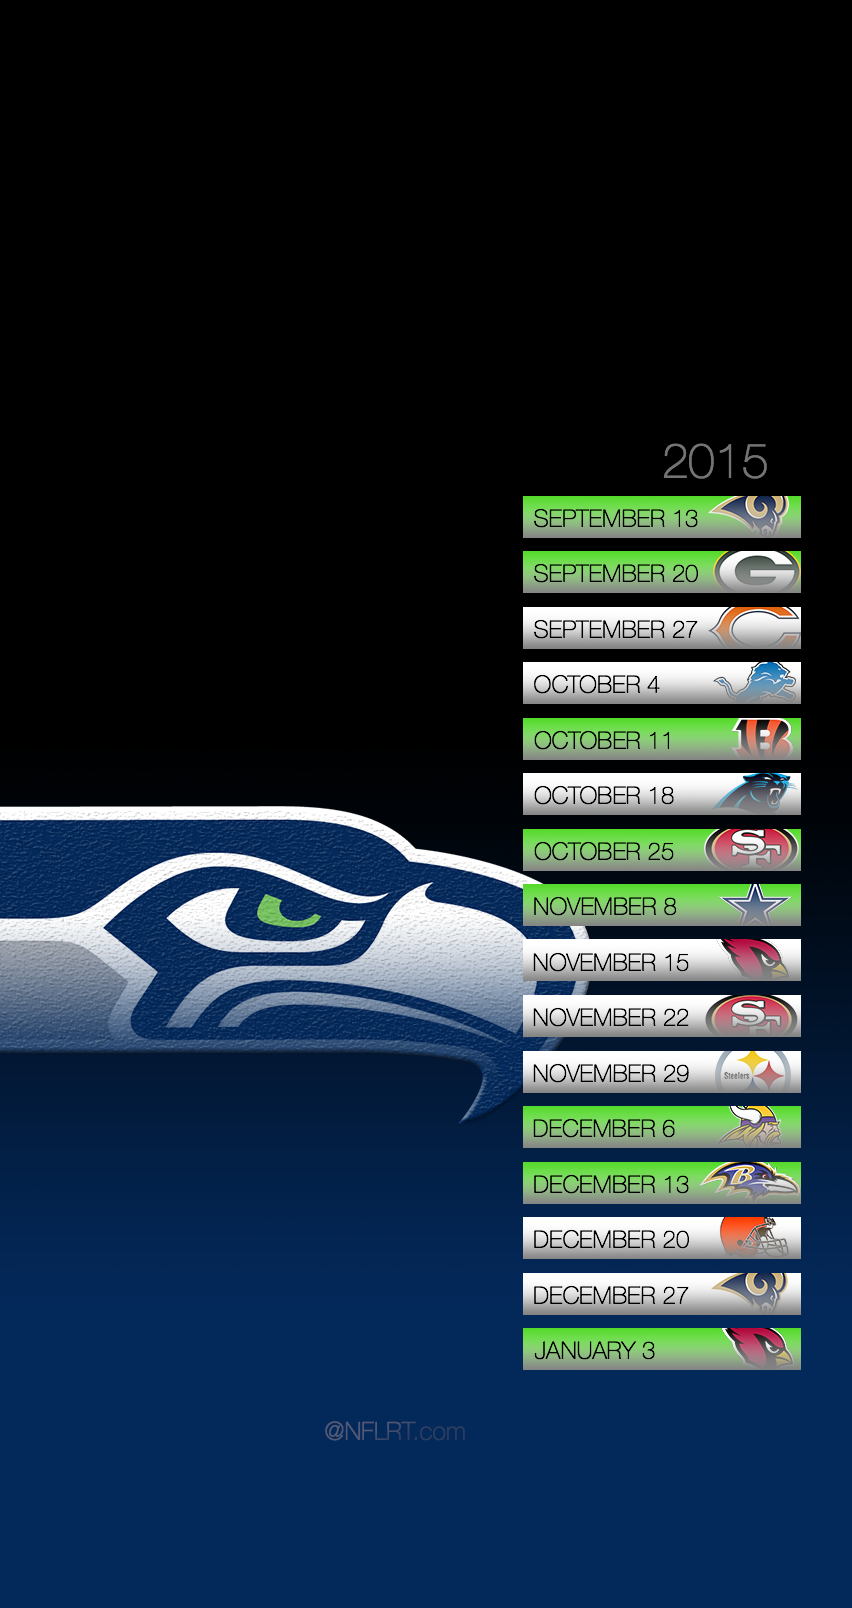 2015 NFL Schedule Wallpapers - Page 8 of 8 - @NFLRT